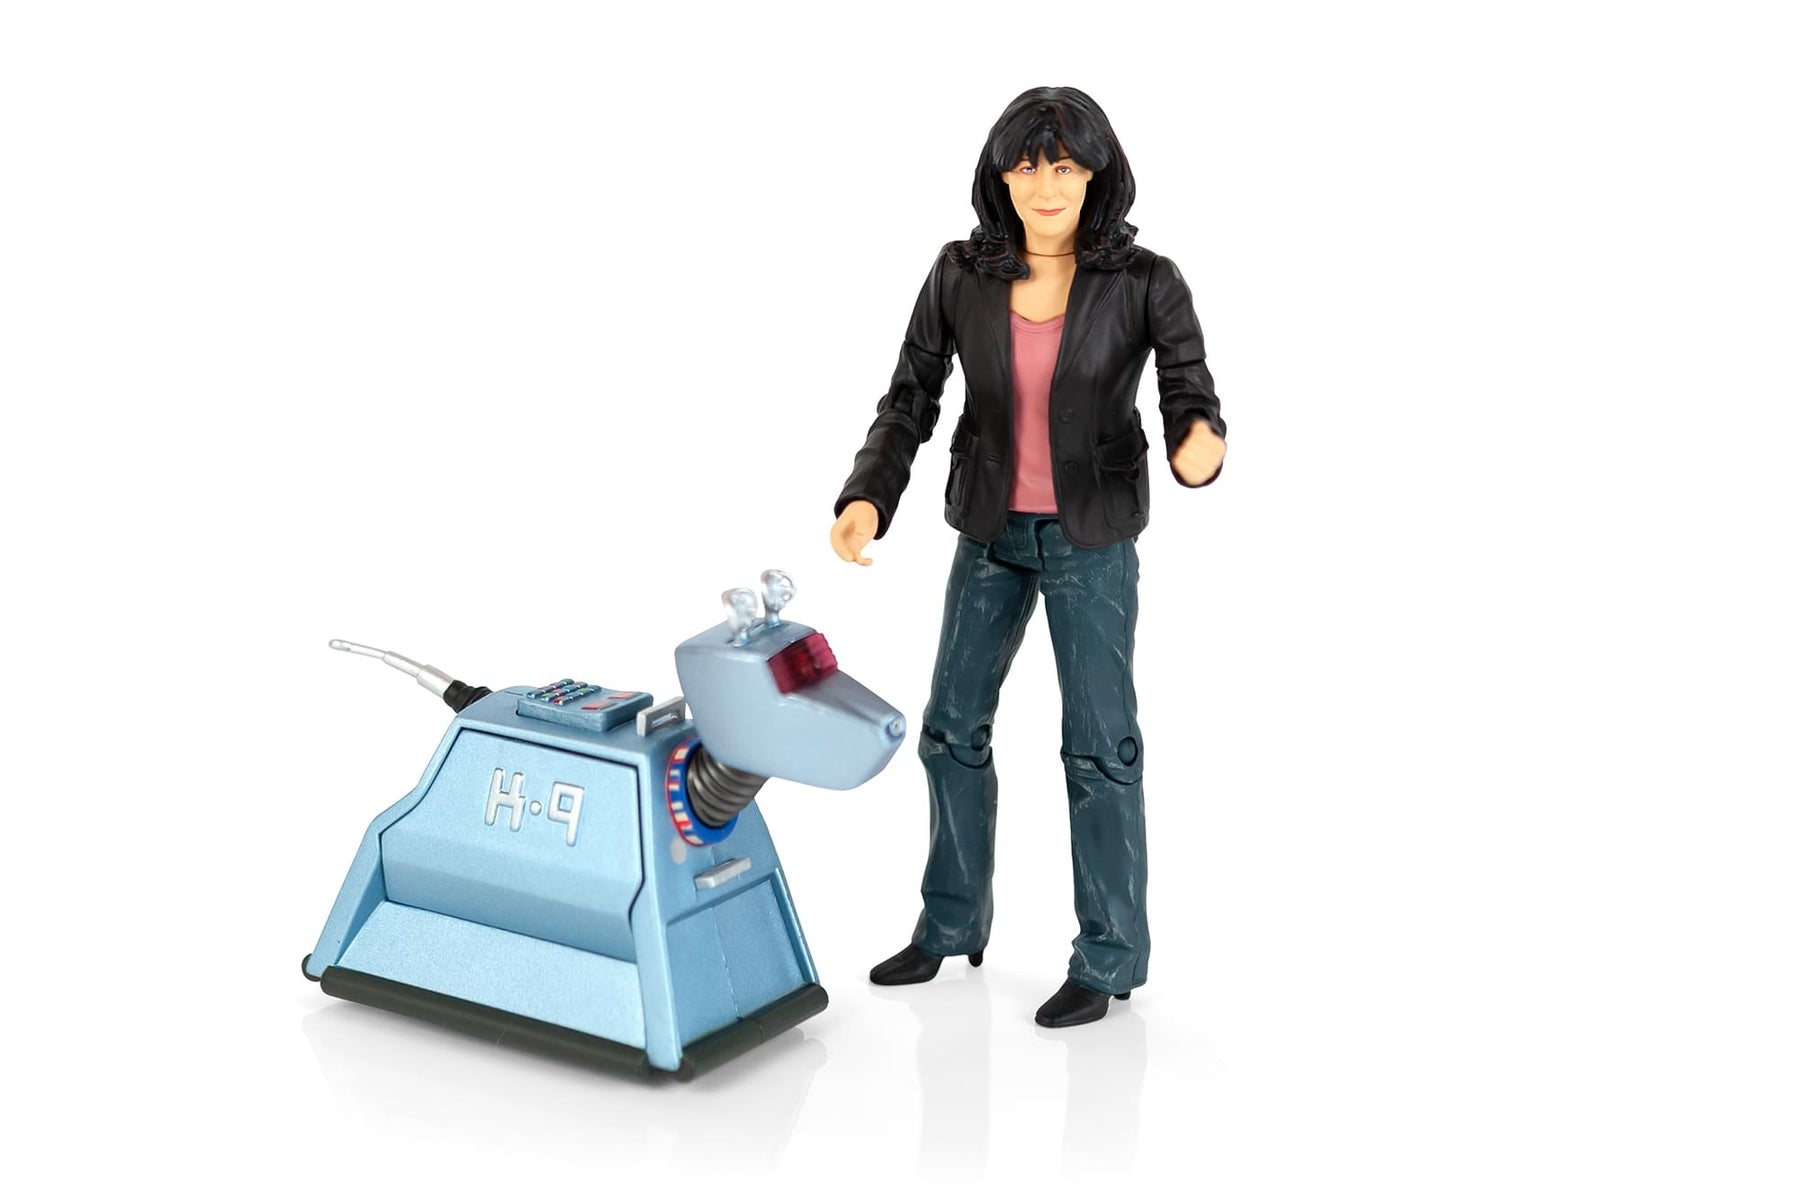 Doctor Who 5.5" Action Figure Set: Sarah Jane and K9